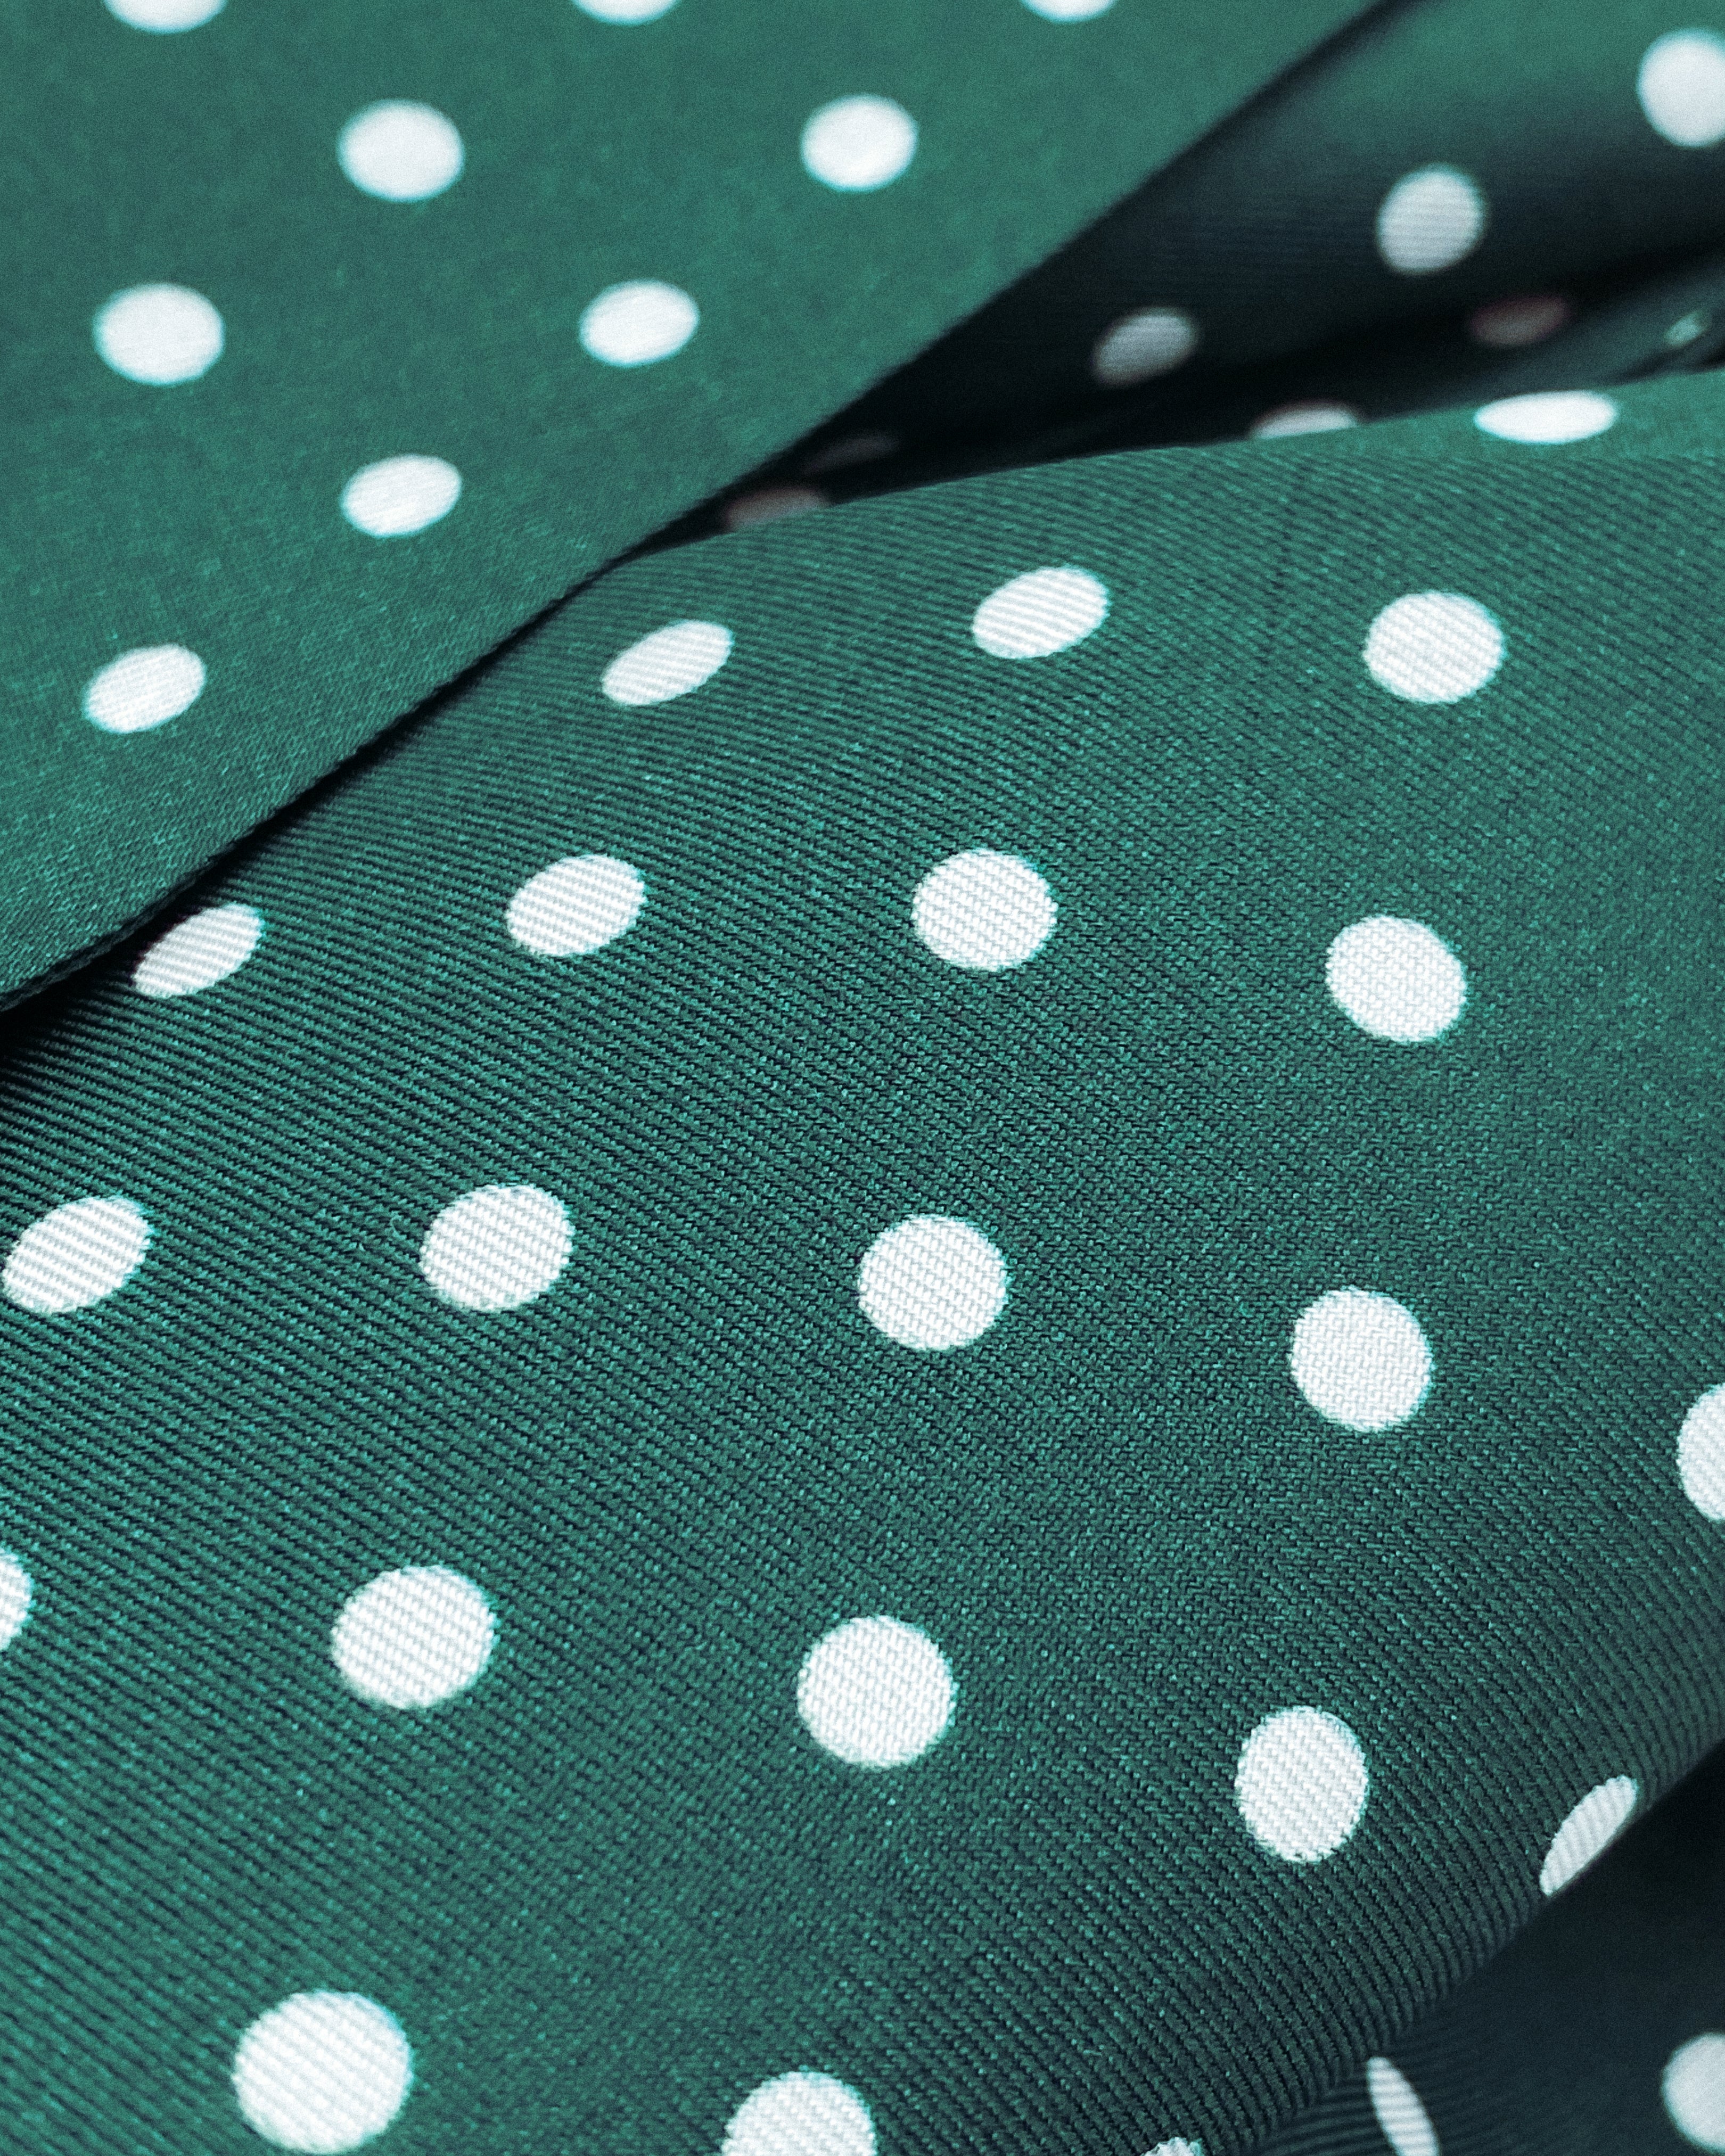 Men's Silk Polka Dot Aviator Scarf in Racing Green - The Westminster RG Aviator (AVAILABLE 29th APRIL)